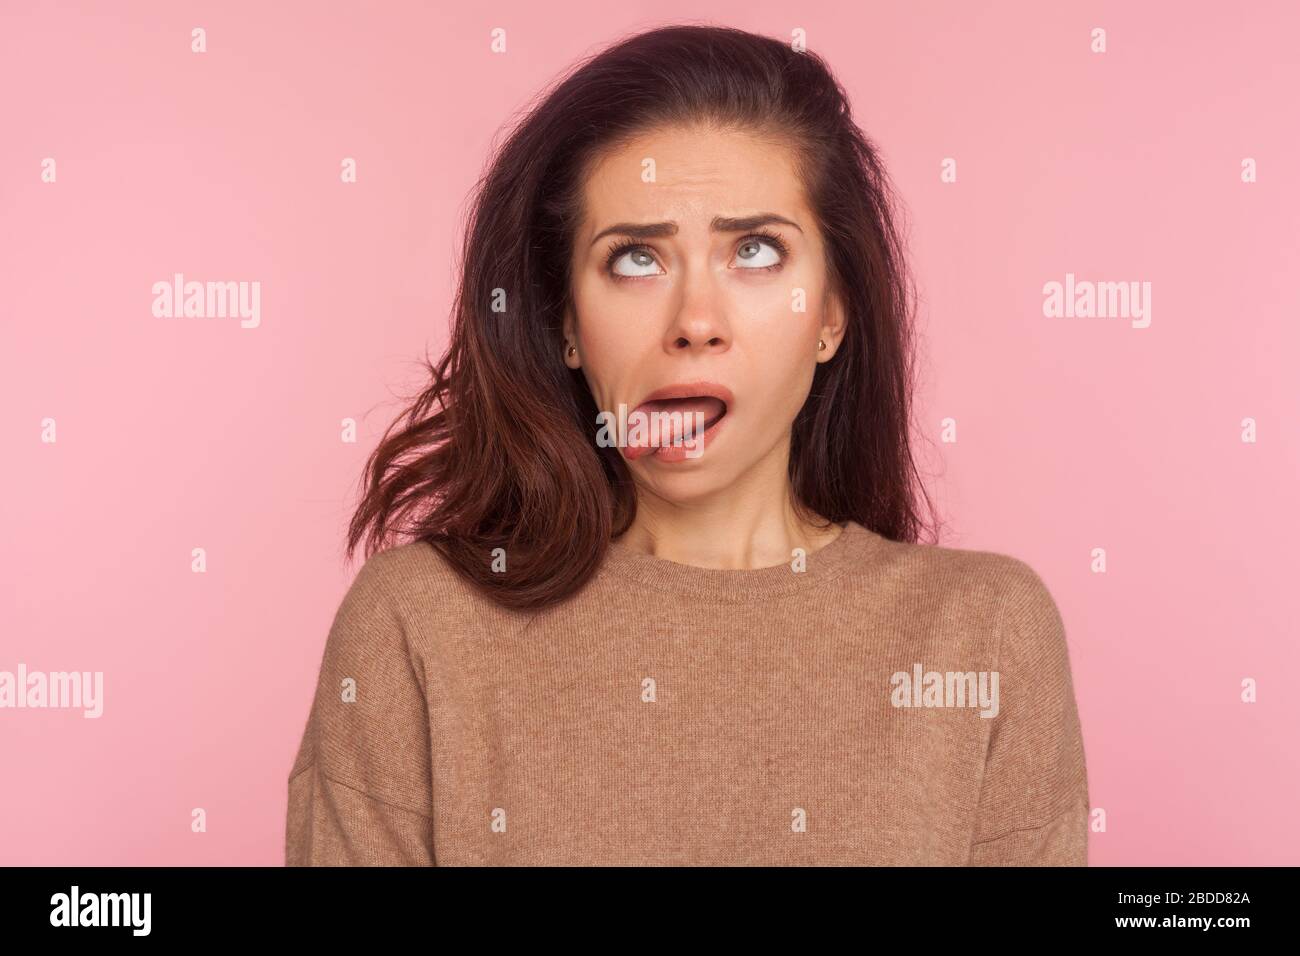 Portrait of funny silly young woman with brunette hair looking cross eyed and sticking tongue out, making dumb brainless face, disobedient goofy expre Stock Photo